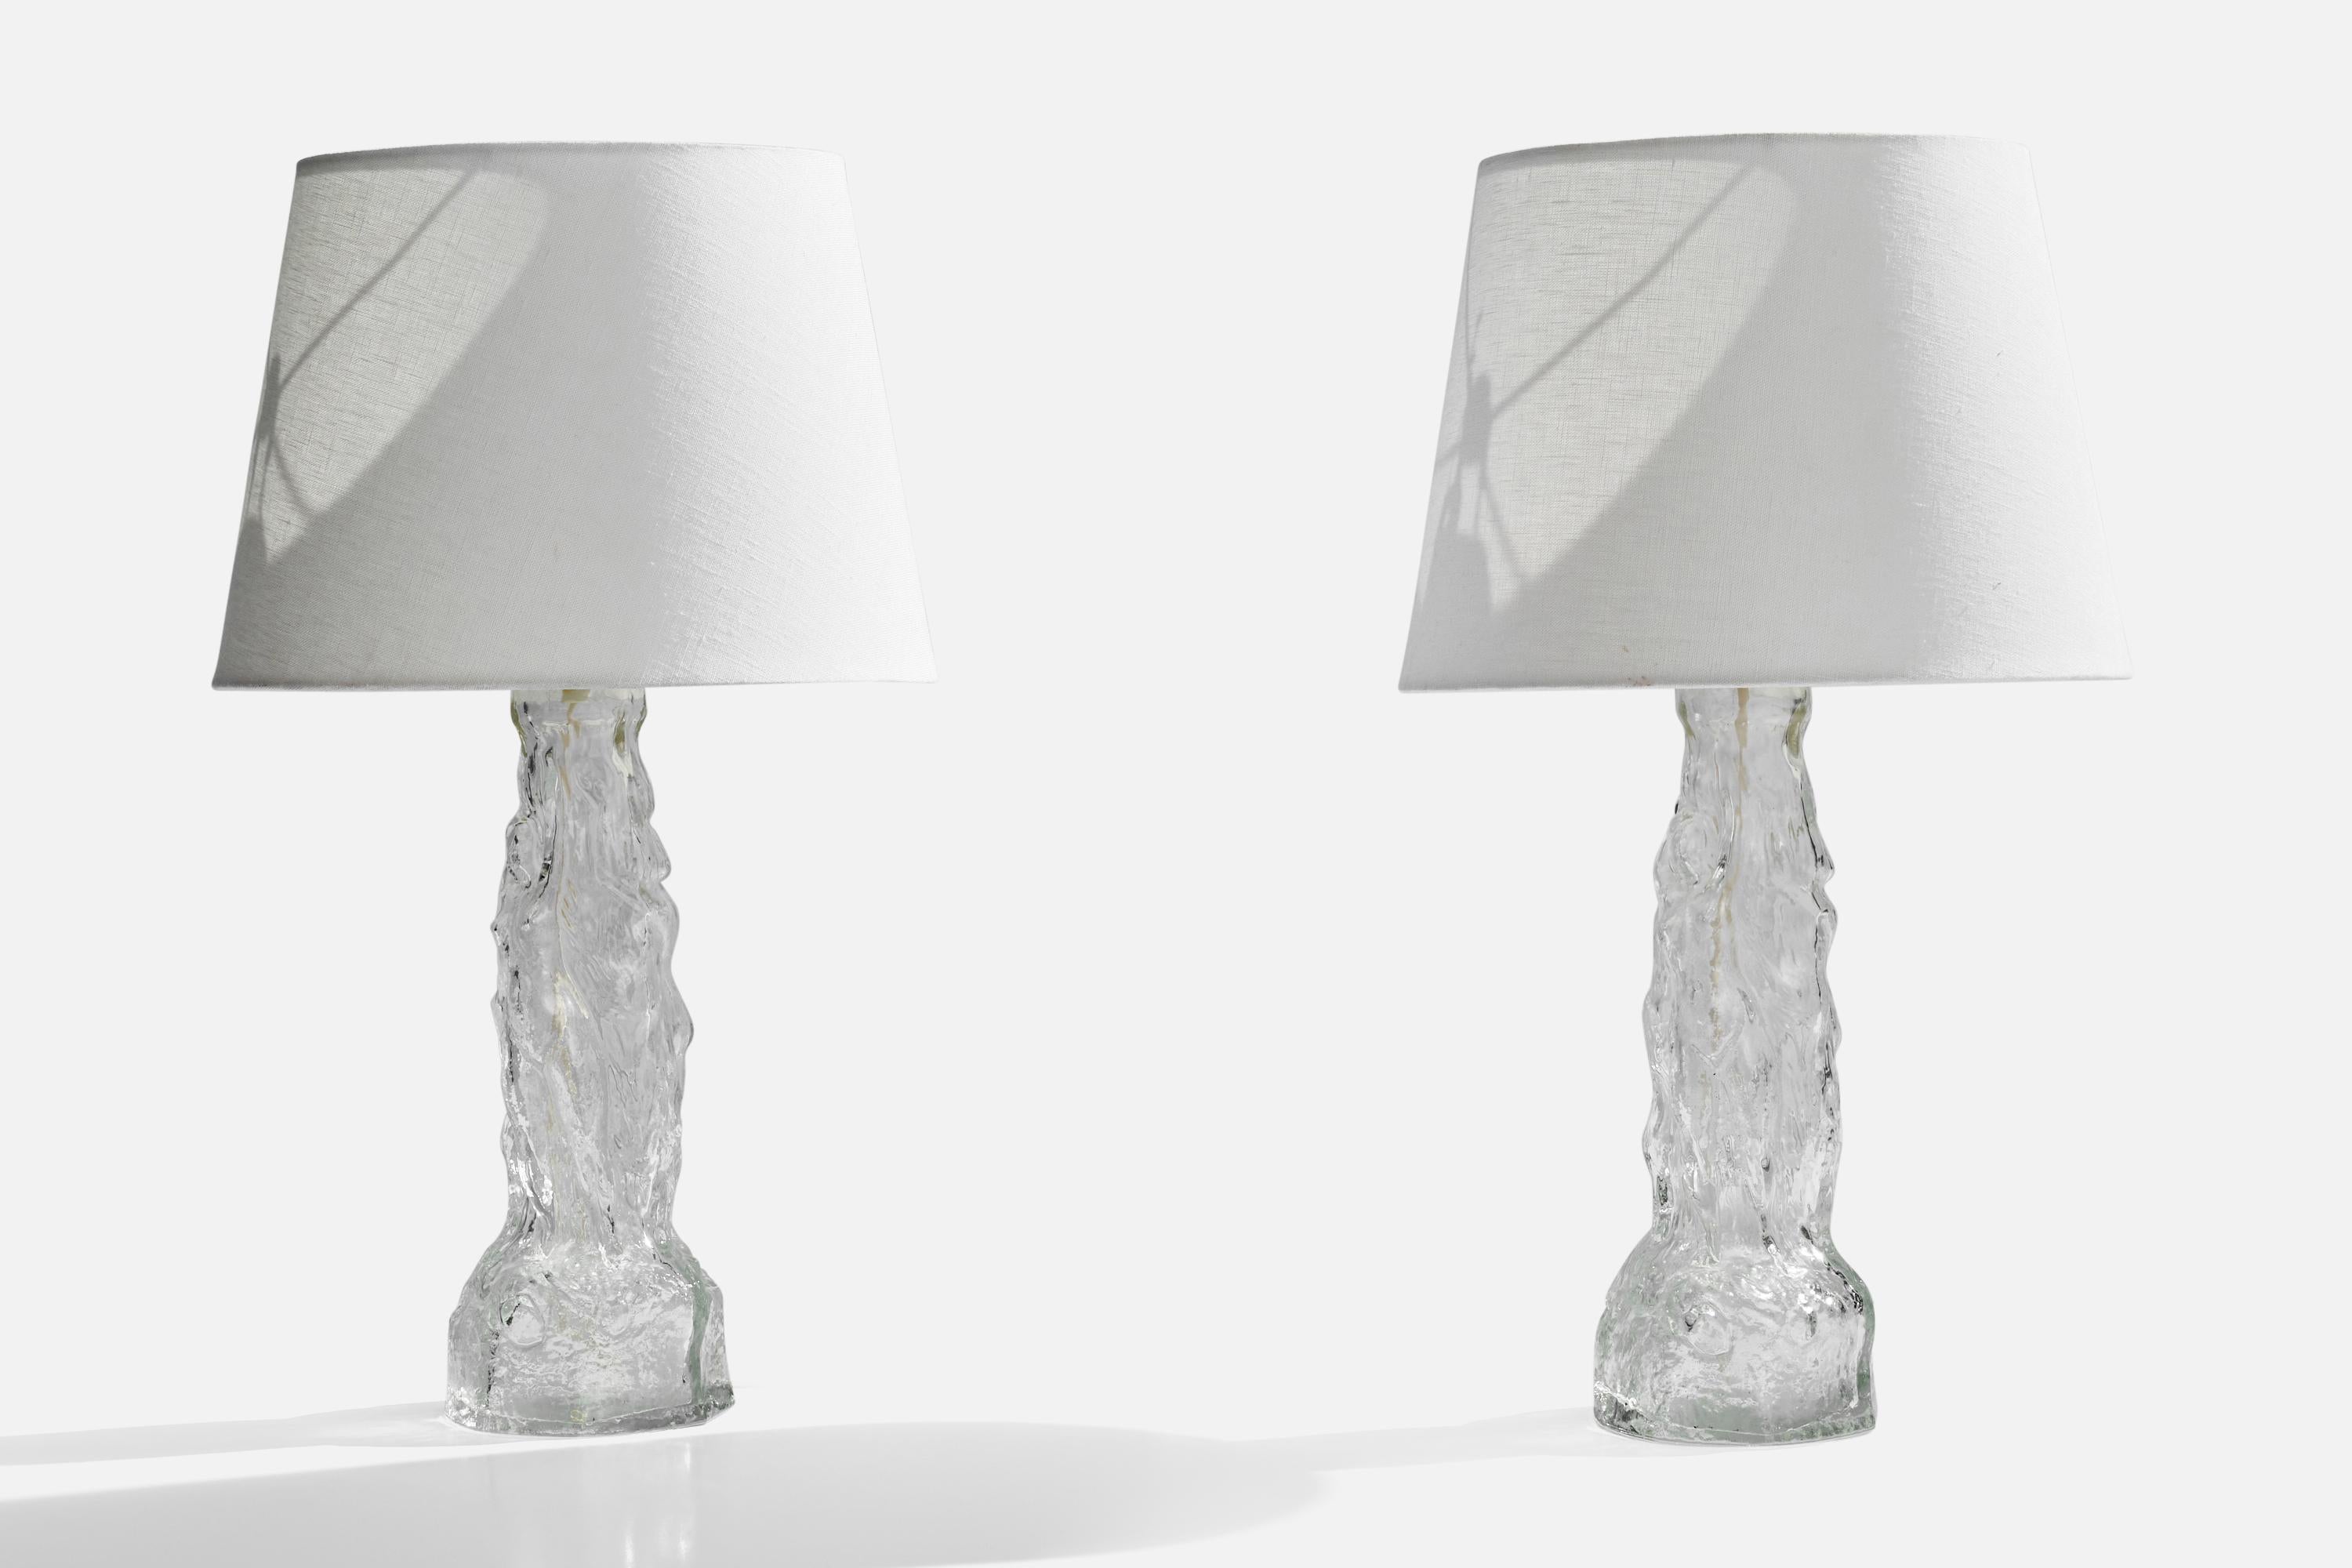 A pair of glass and brass table lamps designed and produced in Sweden, 1960s.

Dimensions of Lamp (inches): 15.5” H x 5.5”  Diameter
Dimensions of Shade (inches): 9” Top Diameter x 12” Bottom Diameter x 9” H
Dimensions of Lamp with Shade (inches):